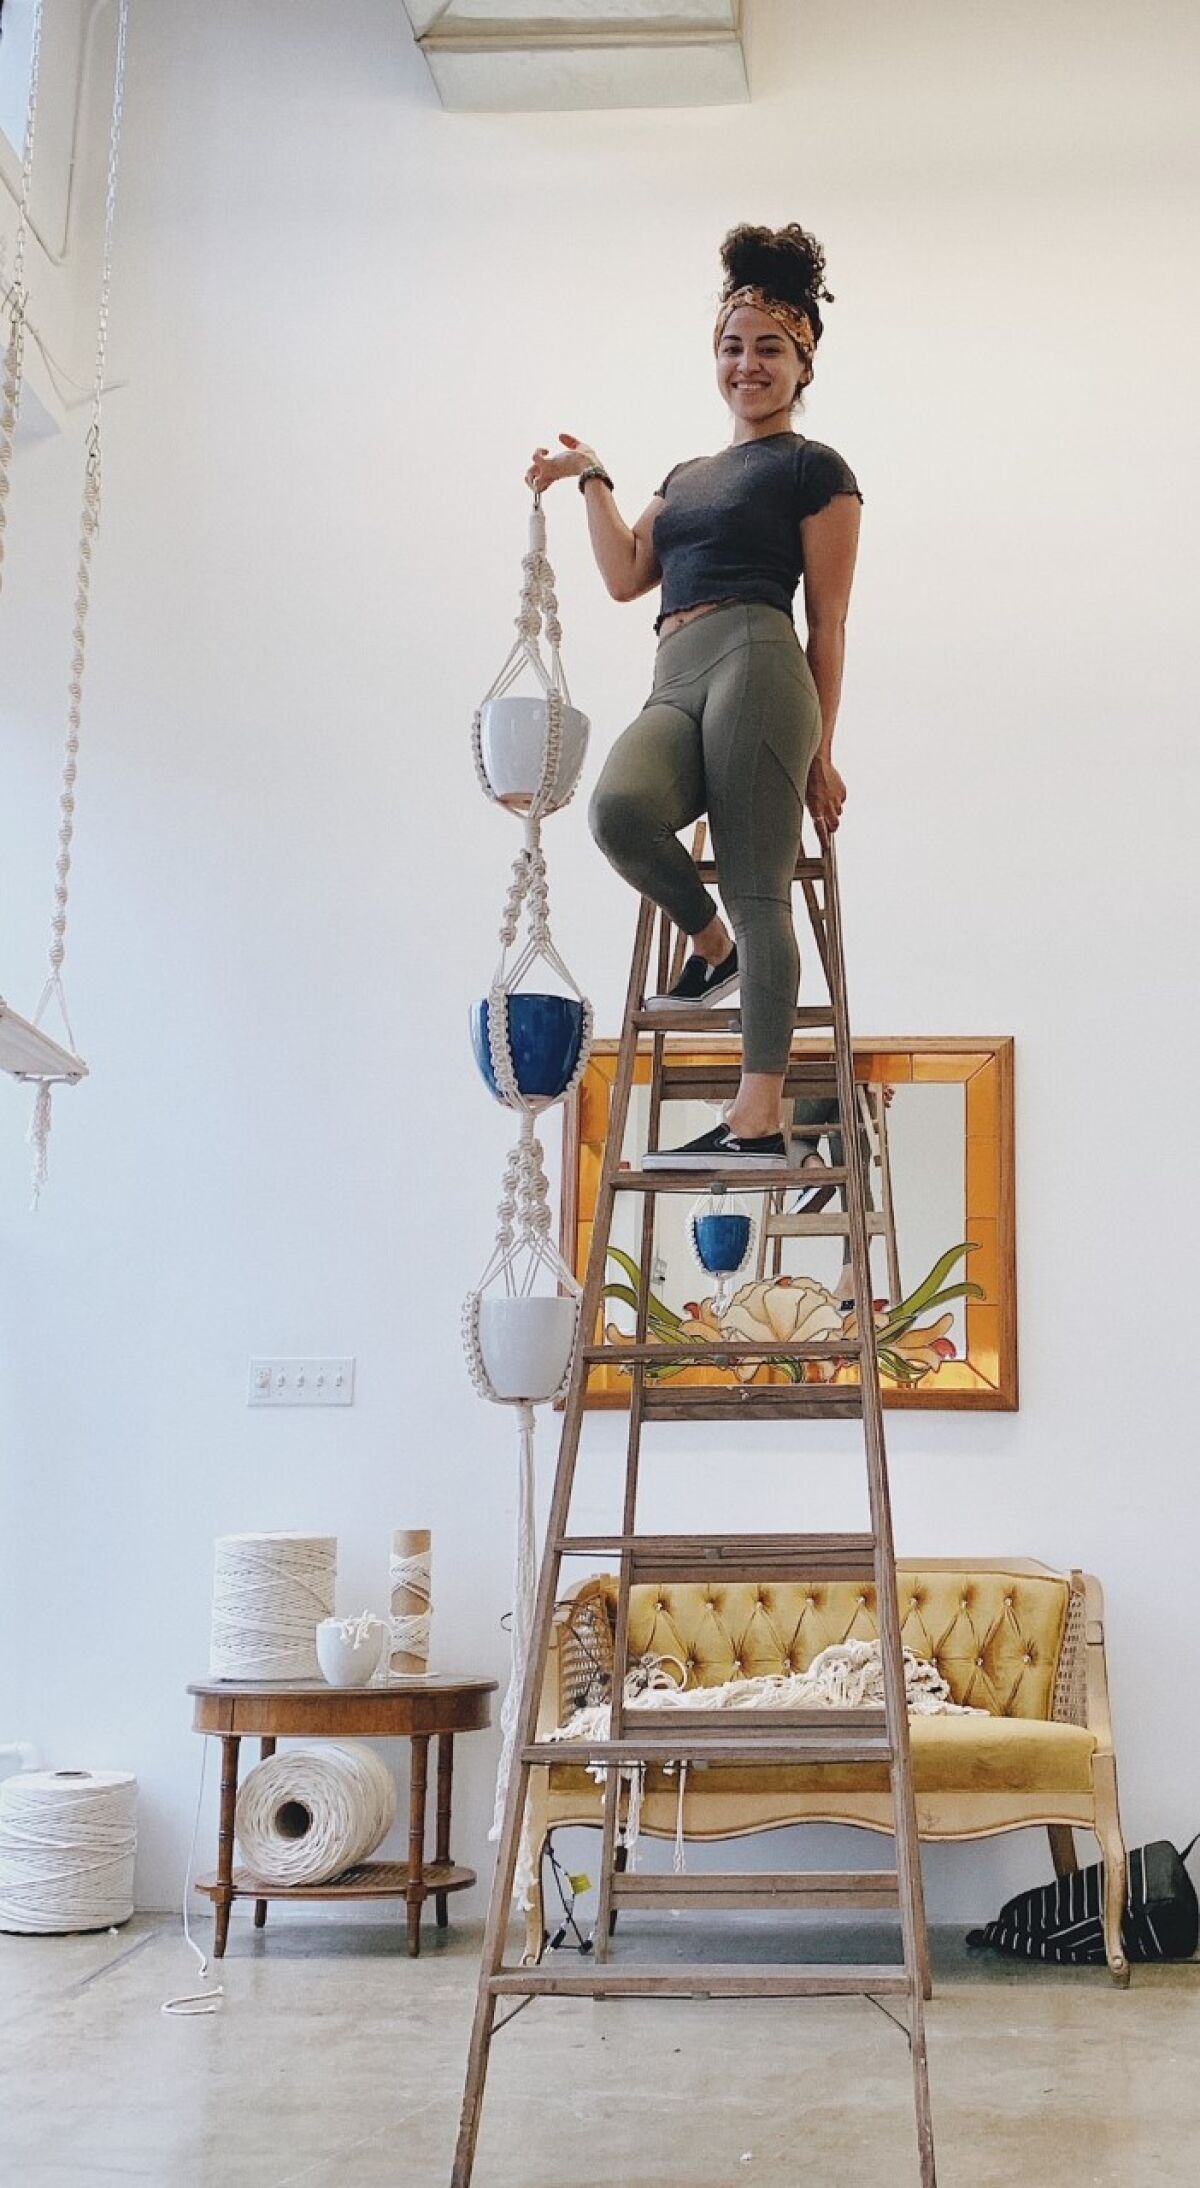 Lola Morales stands on a ladder holding a macramé plant hanger that holds three potted plants.